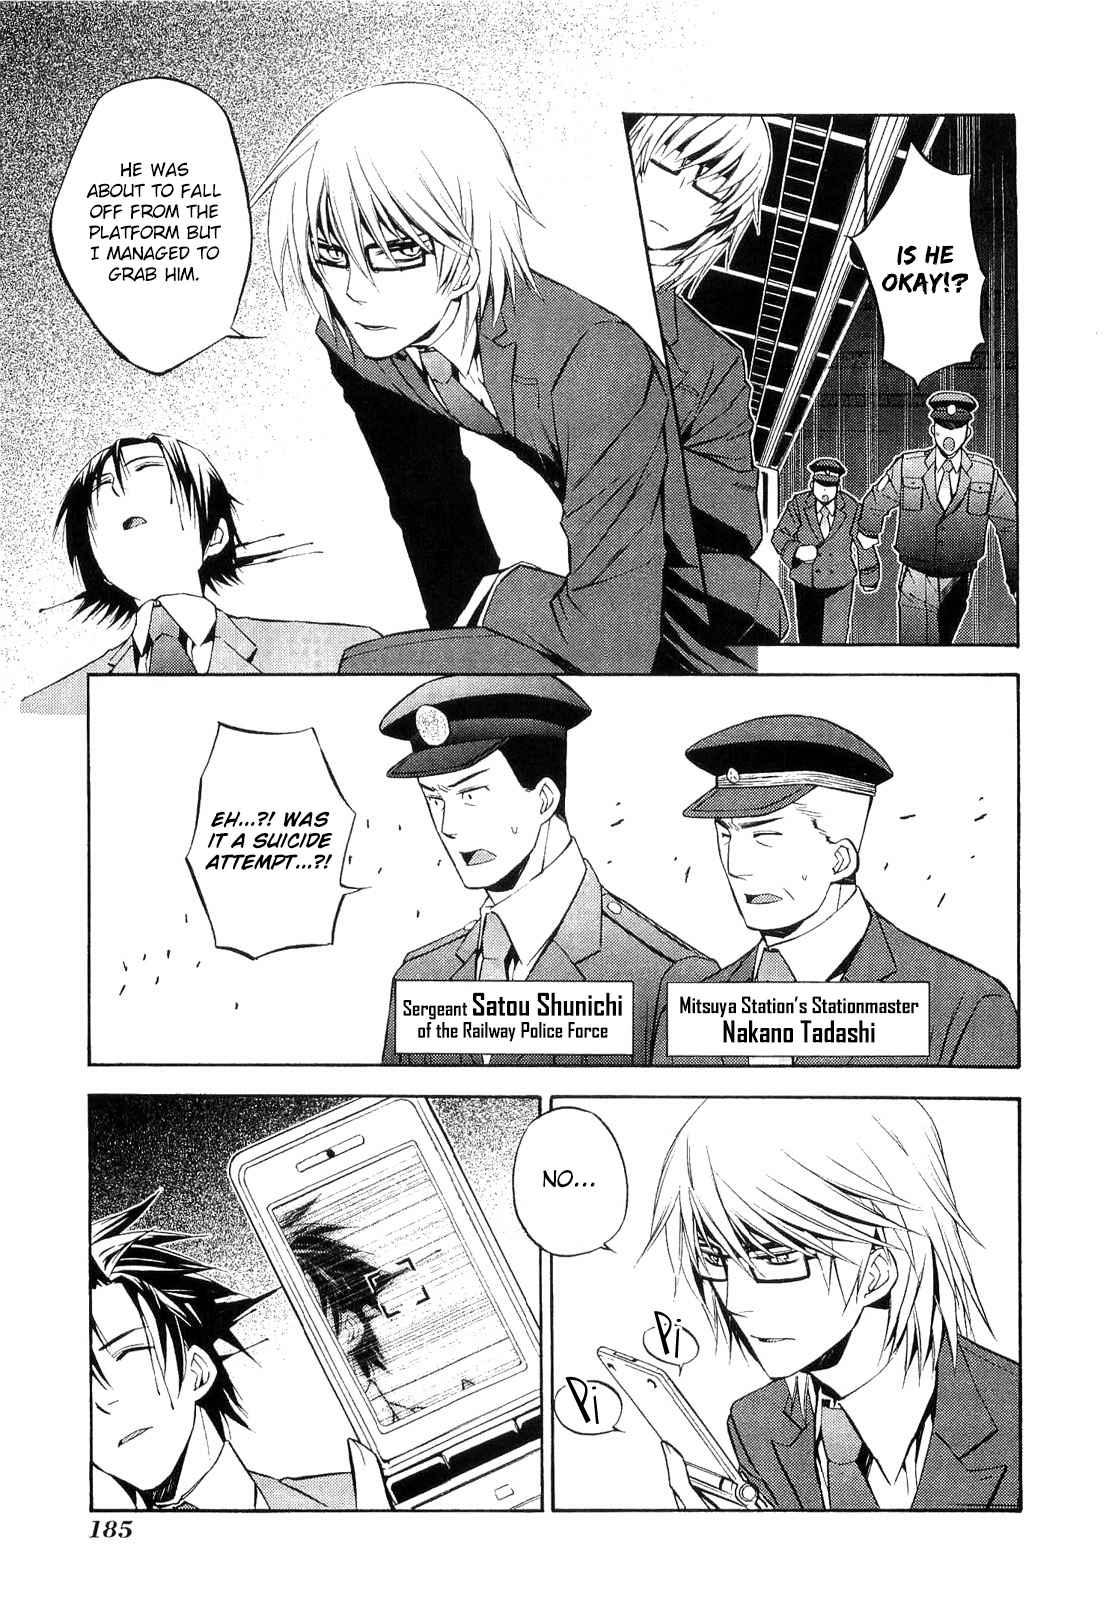 893 Ways to Become a Detective Vol. 2 Ch. 16 The Station 6